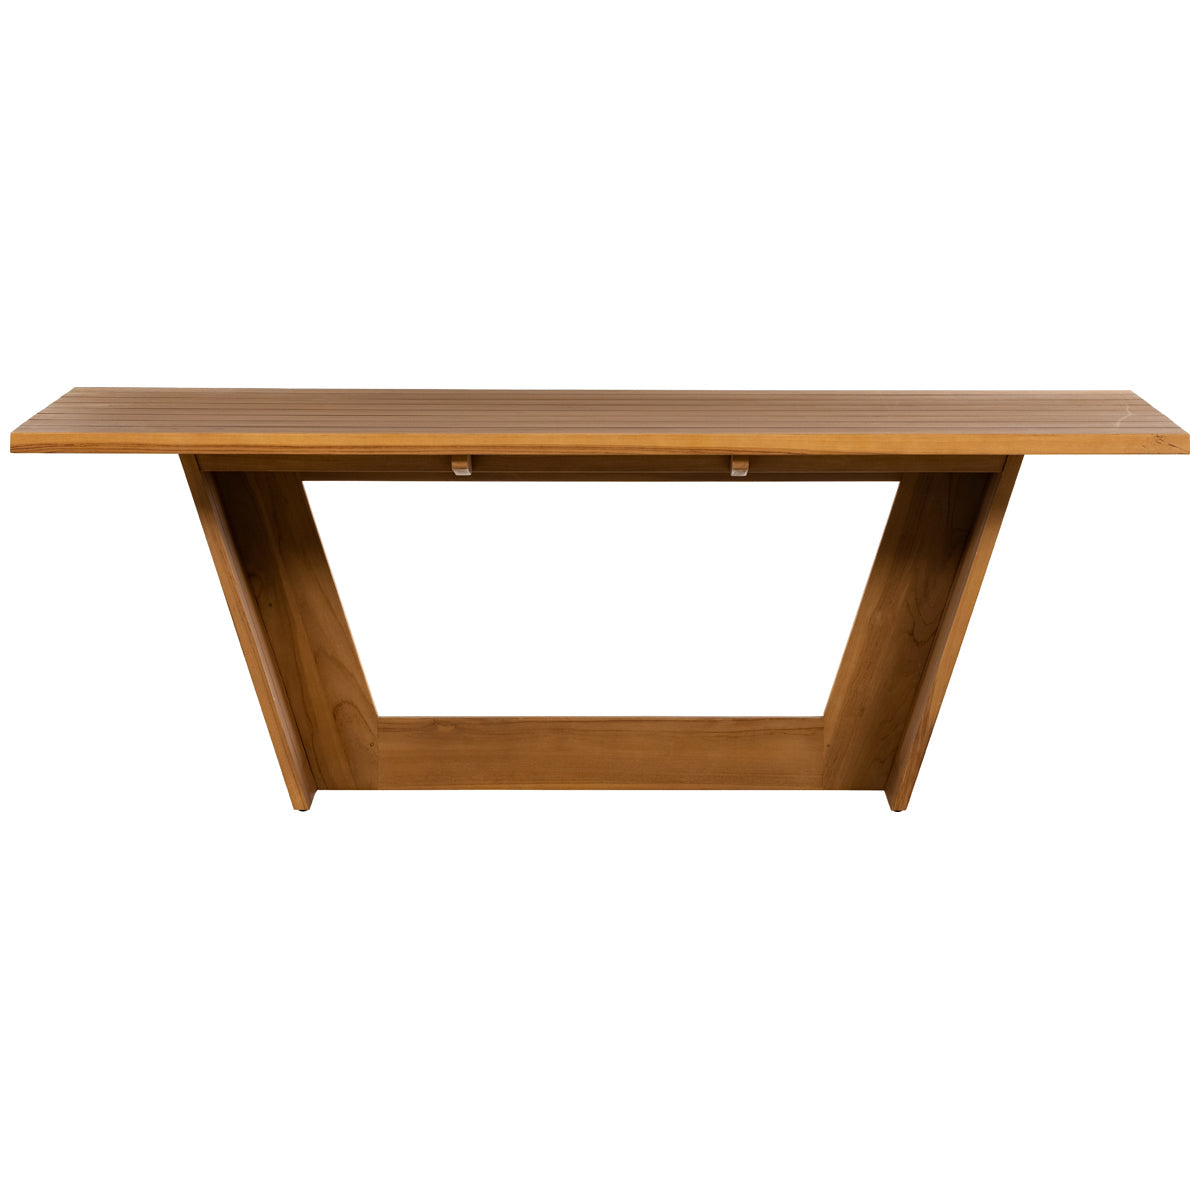 Four Hands Solano Warwick Outdoor Dining Table